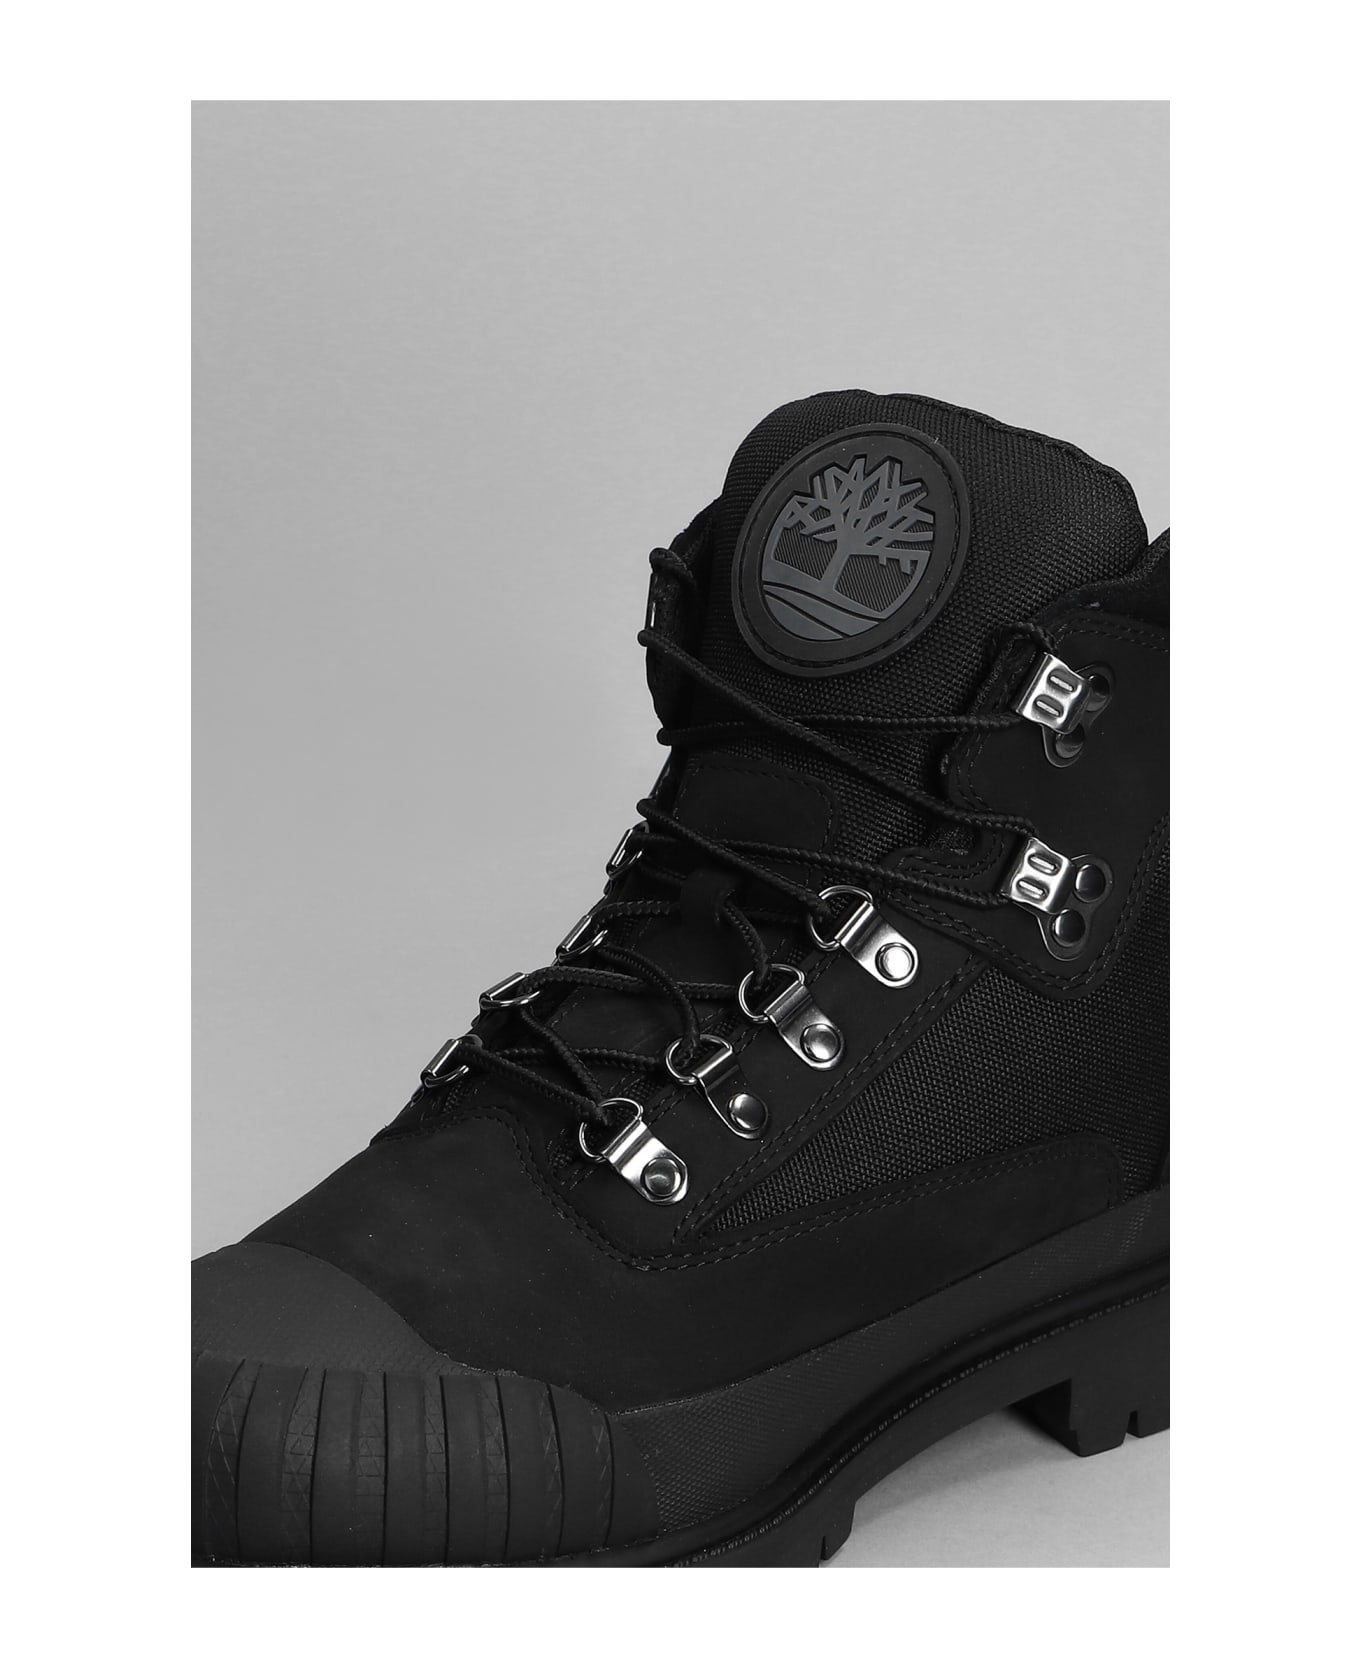 Timberland Heritage Boot Combat Boots In Black Synthetic Fibers - Black